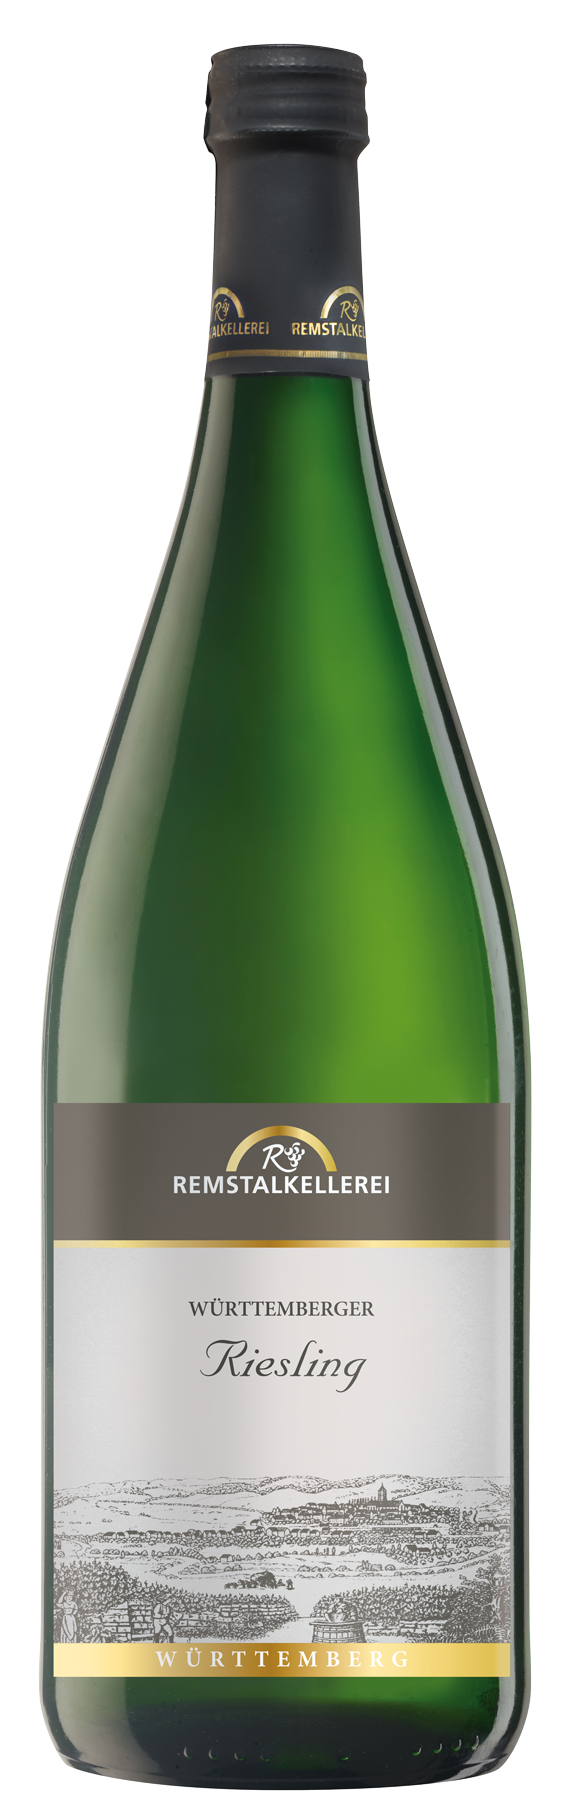 Württemberger Riesling